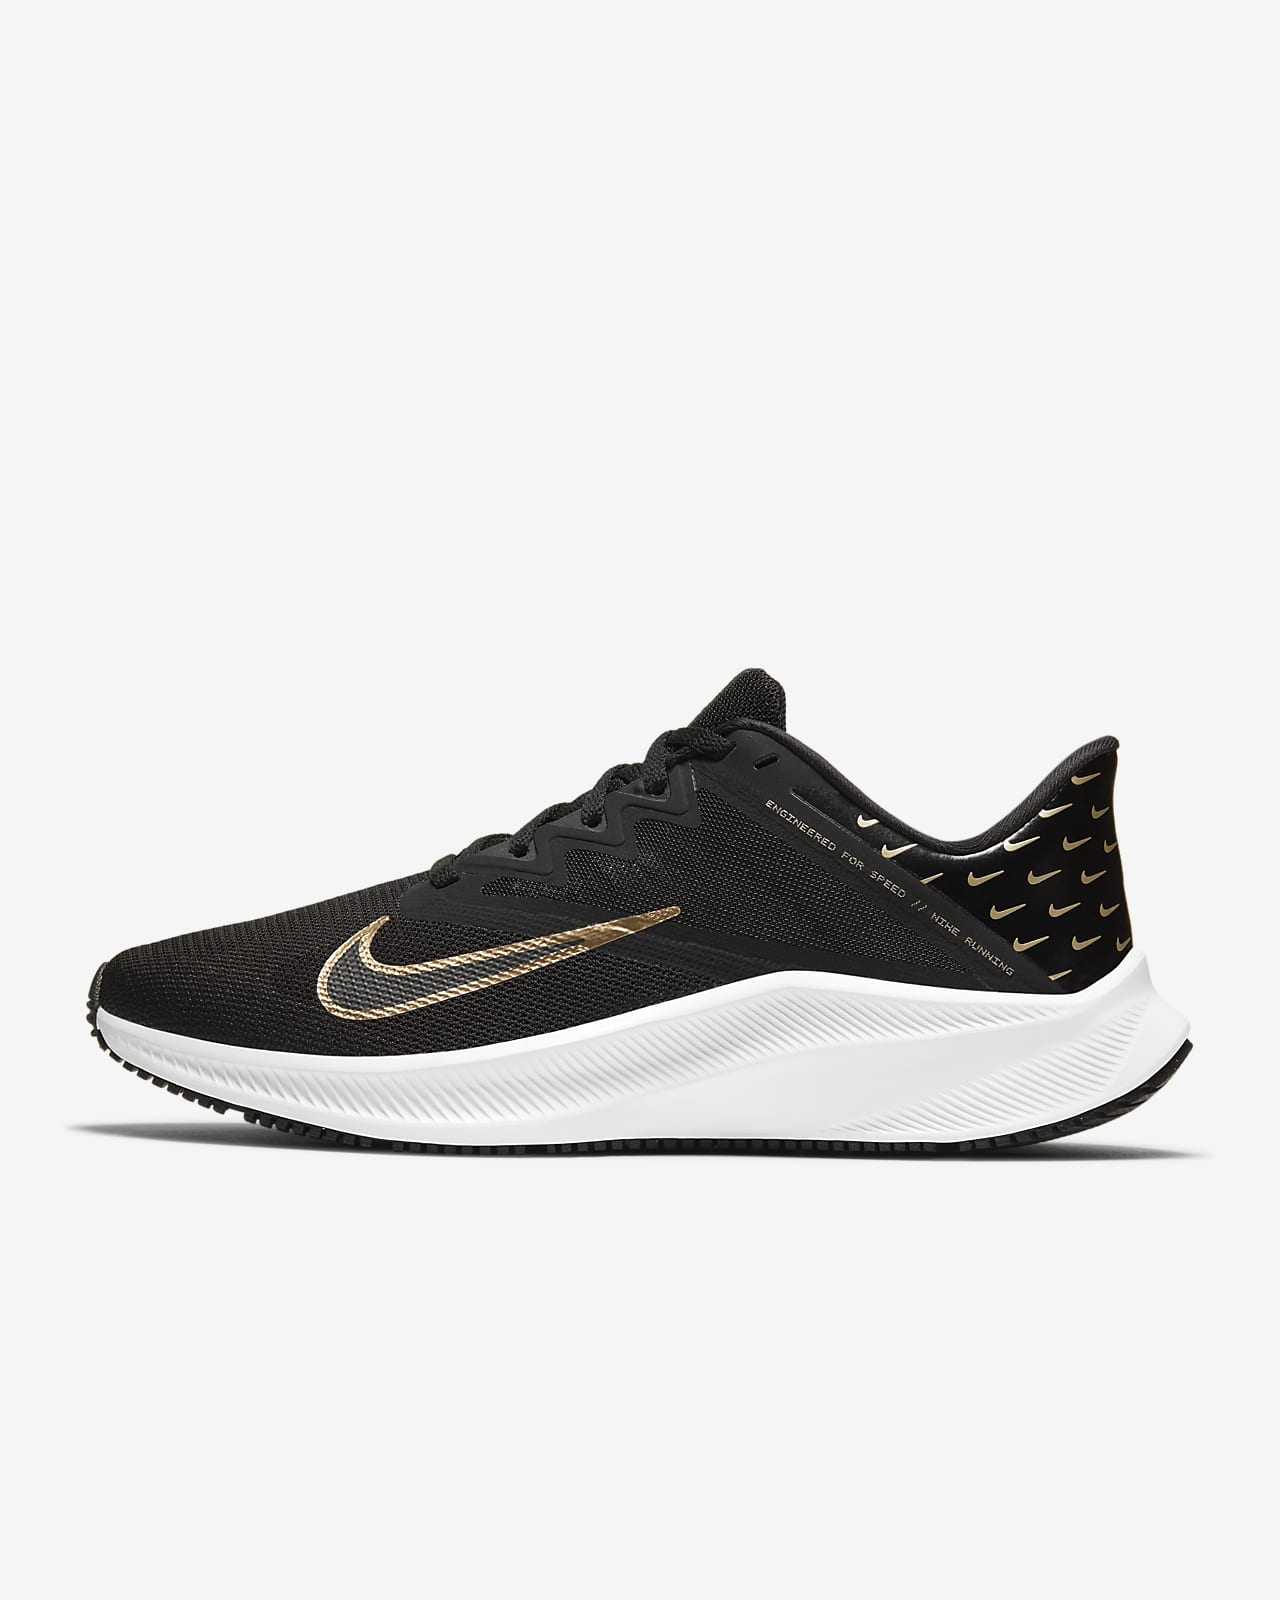 nike running black and gold